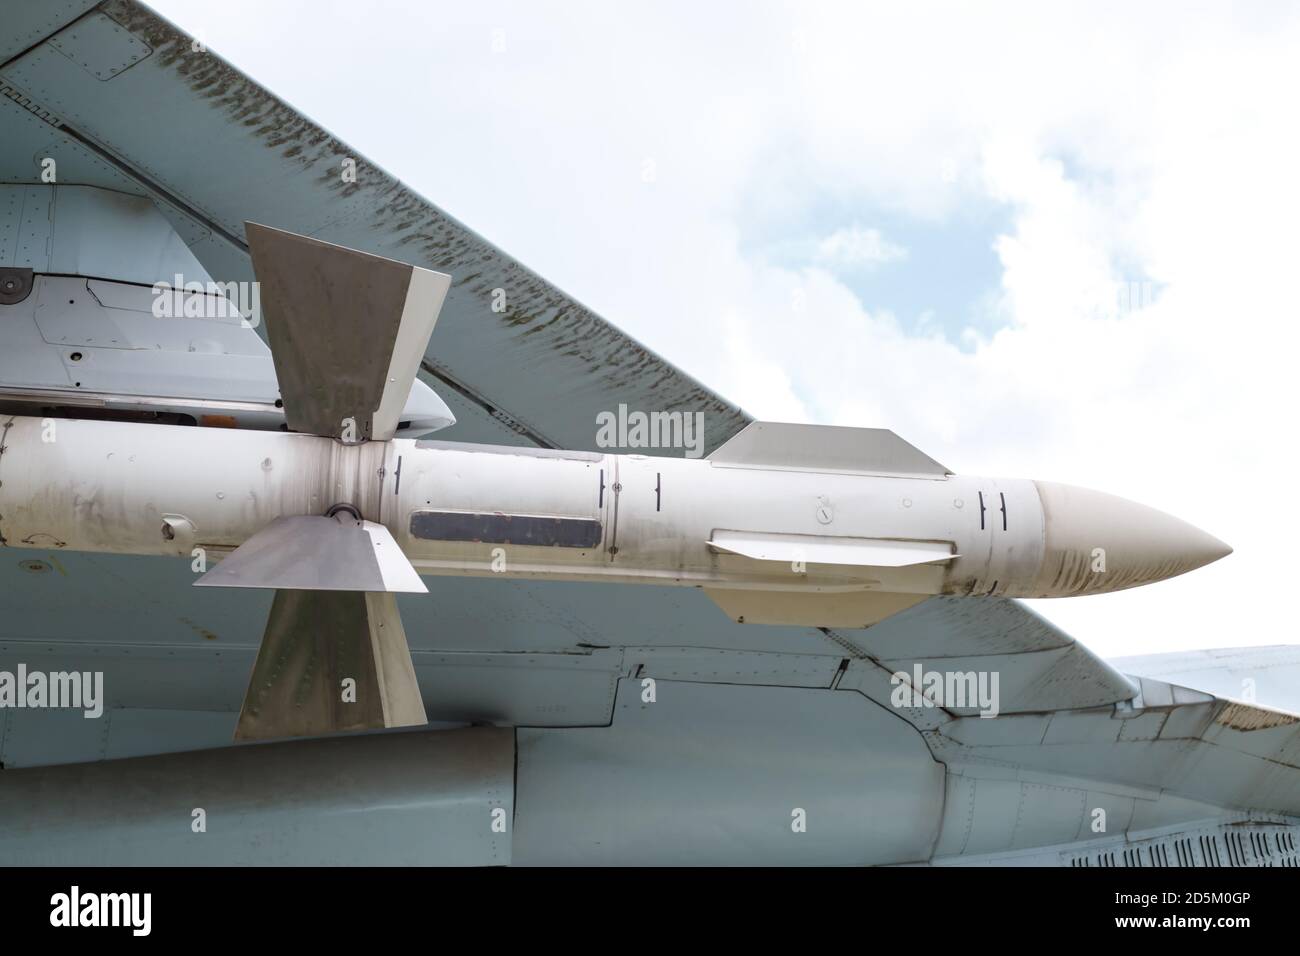 The air-to-air missile is suspended under the wing of the aircraft. Fragment of the plane Stock Photo